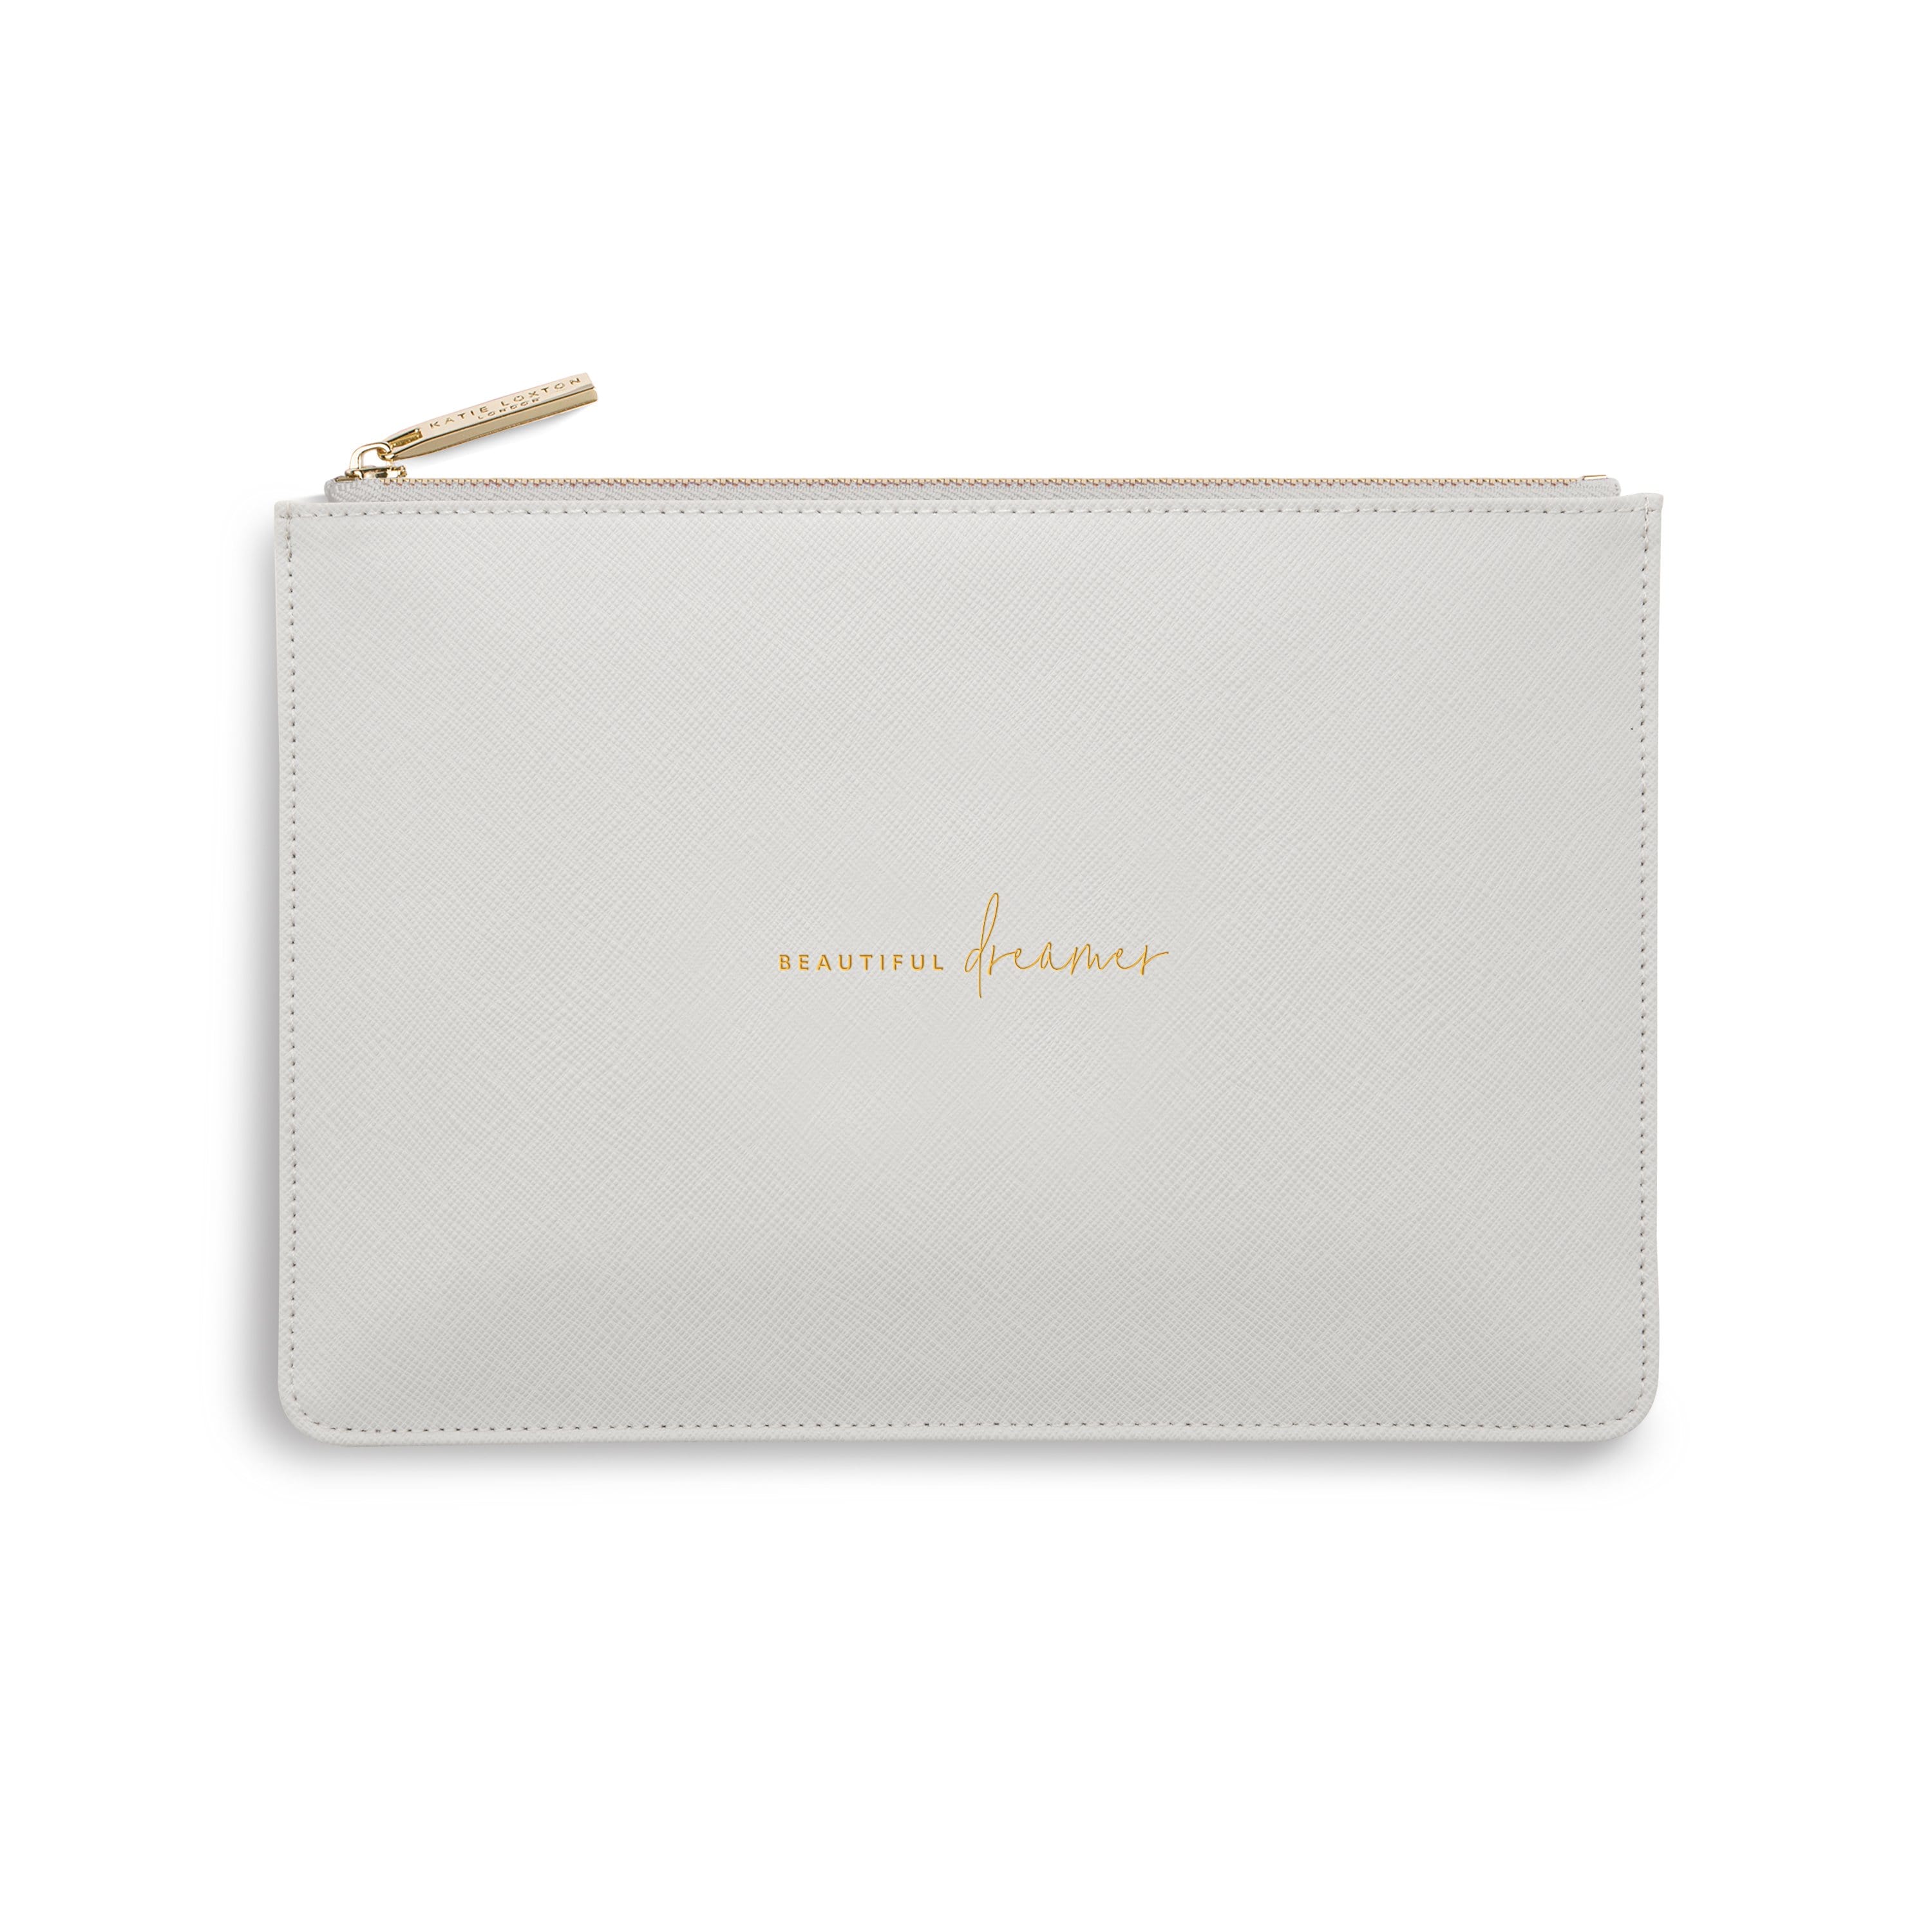 Katie Loxton Gifts One Size Katie Loxton Beautiful Dreamer Perfect Pouch in Pale Grey KLB753 izzi-of-baslow